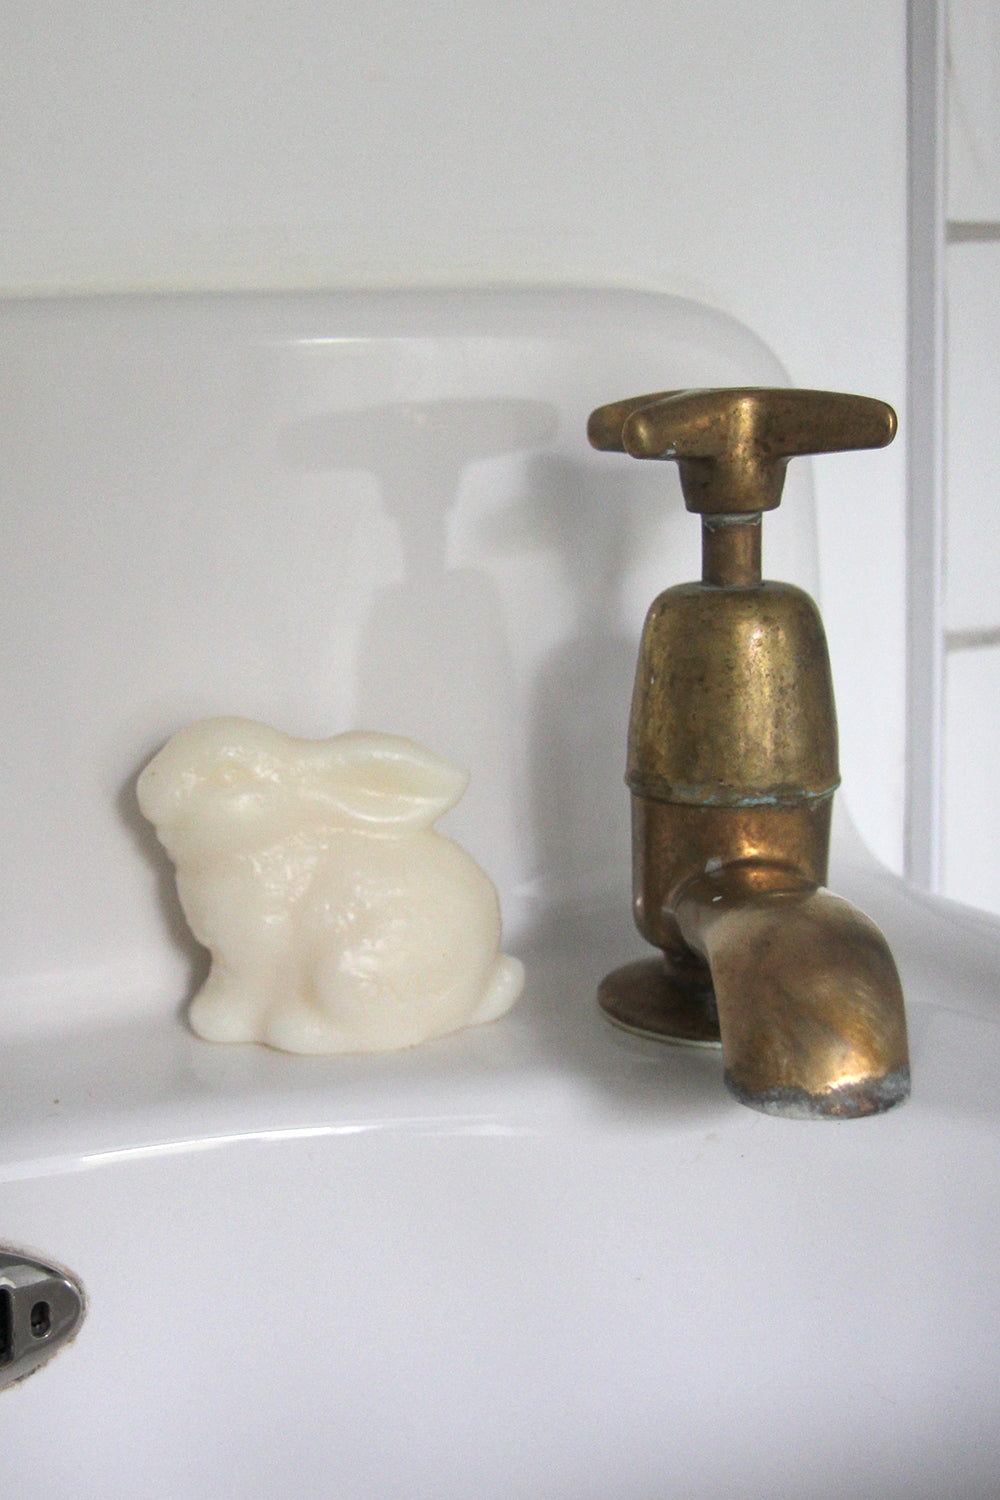 Bunny Shaped Soap with Sheeps Milk / White.